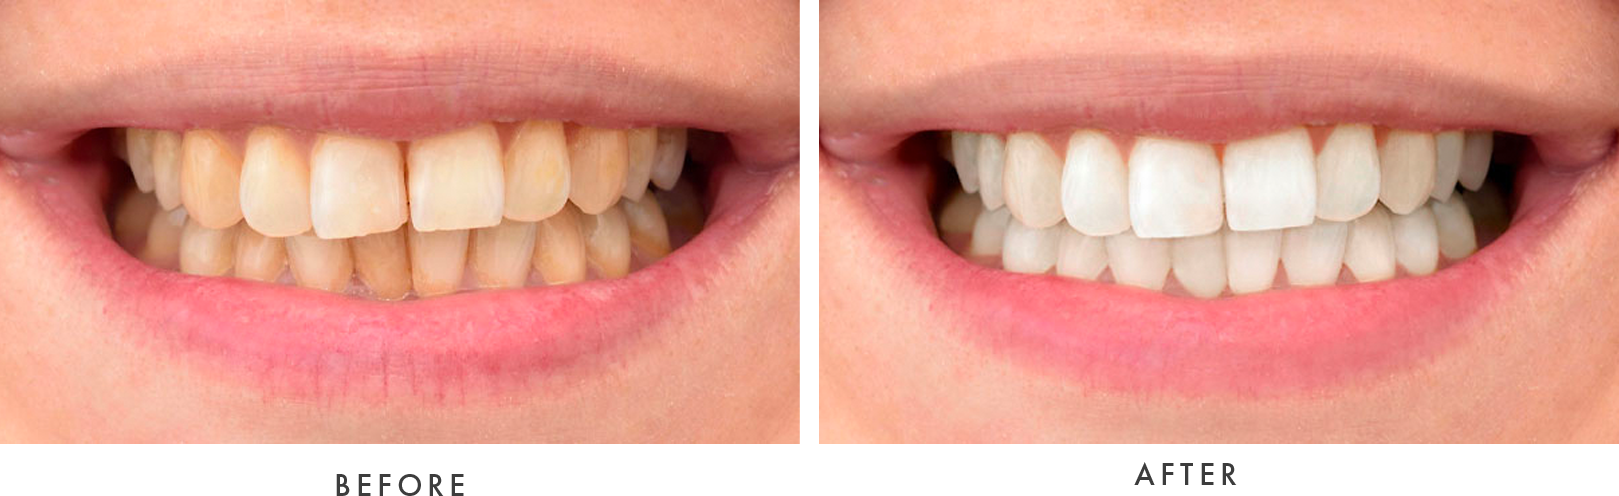 Teeth Whitening Before and After image